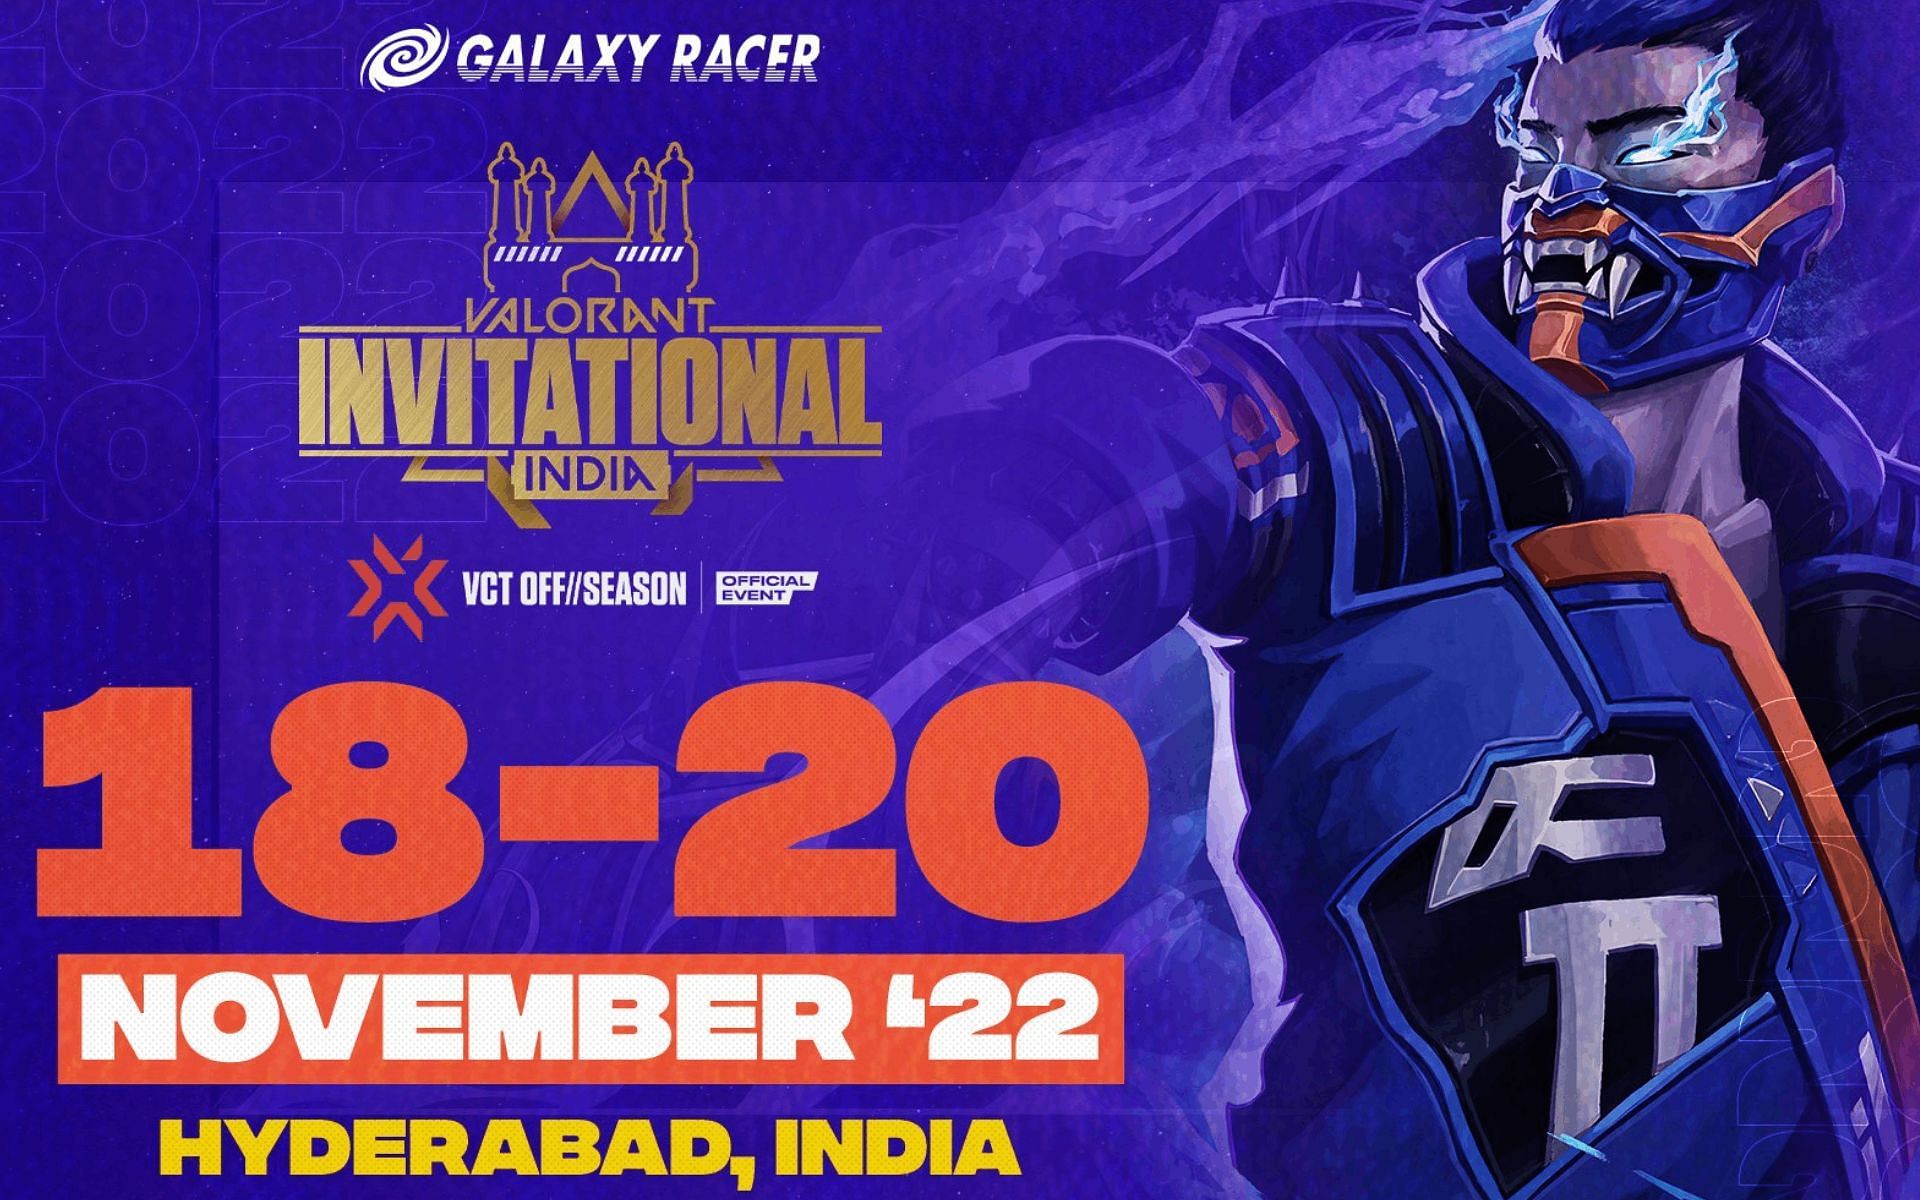 Everything you need to know about the upcoming Valorant India Invitational by Galaxy Racer (Image via Galaxy Racer)